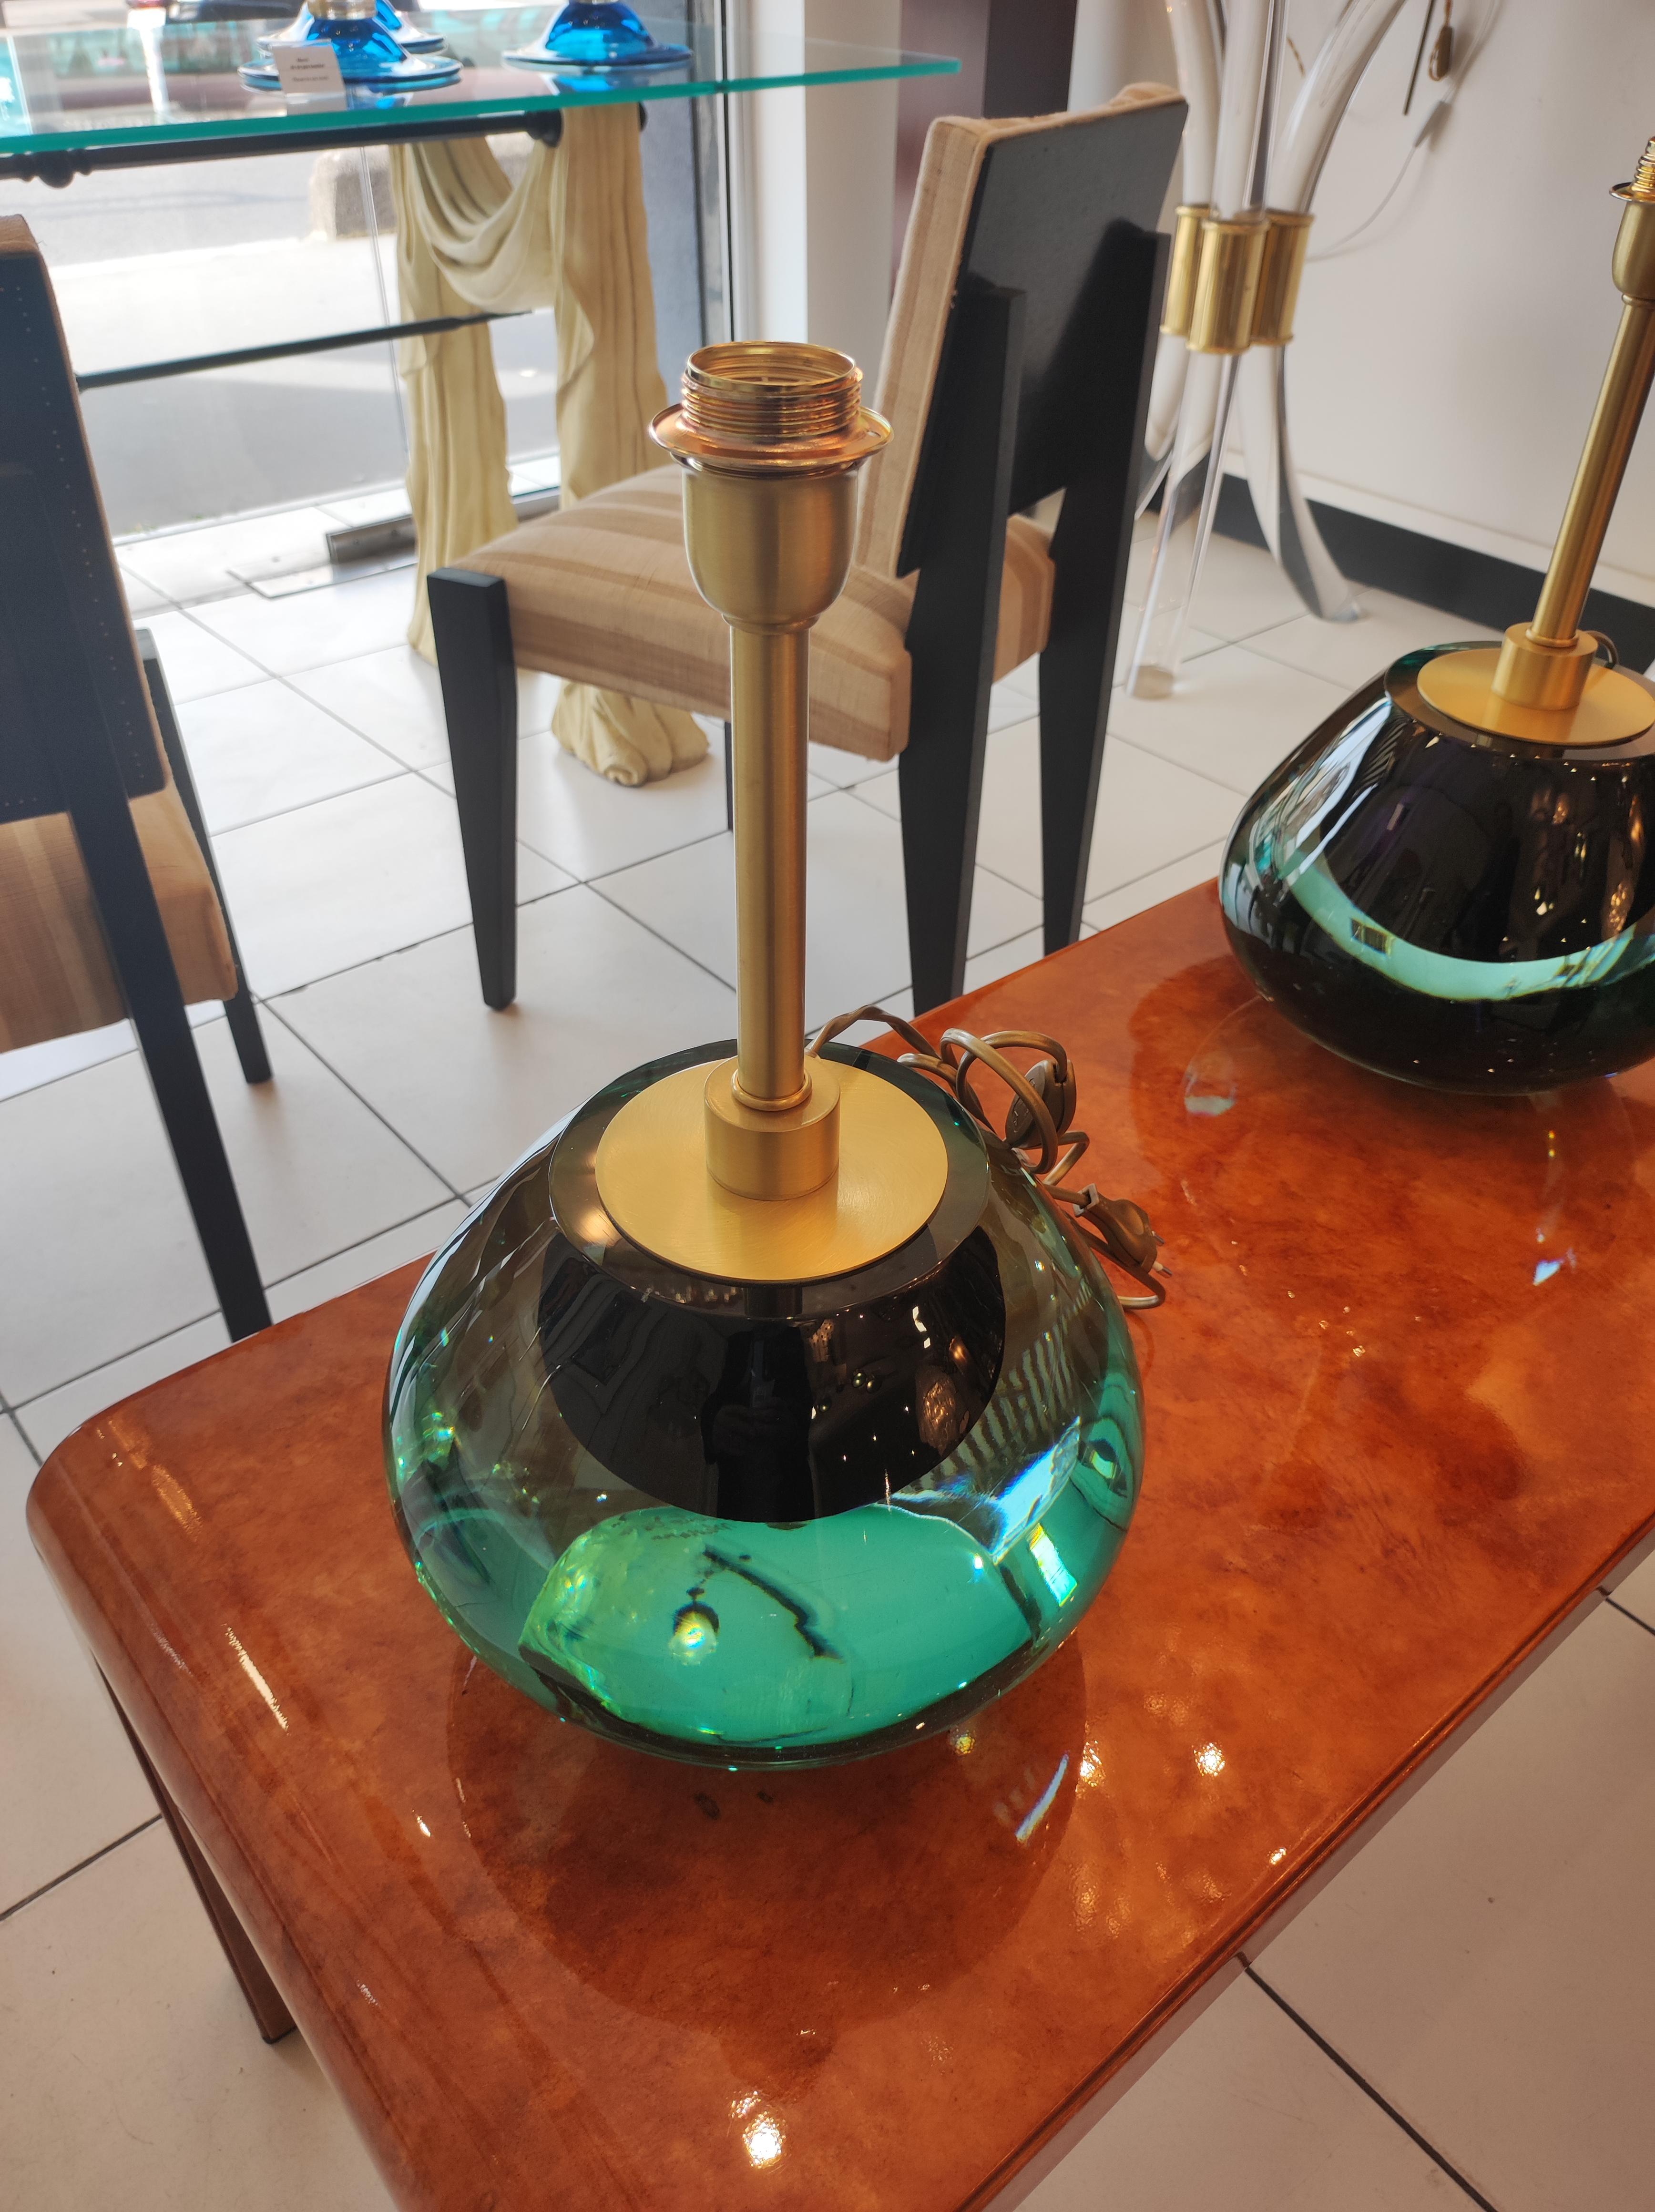 Pair of Italian table lamps in light green/turquoise ( and black in the middle) Murano glass and brass.
E 27 bulbs compatible US E26


